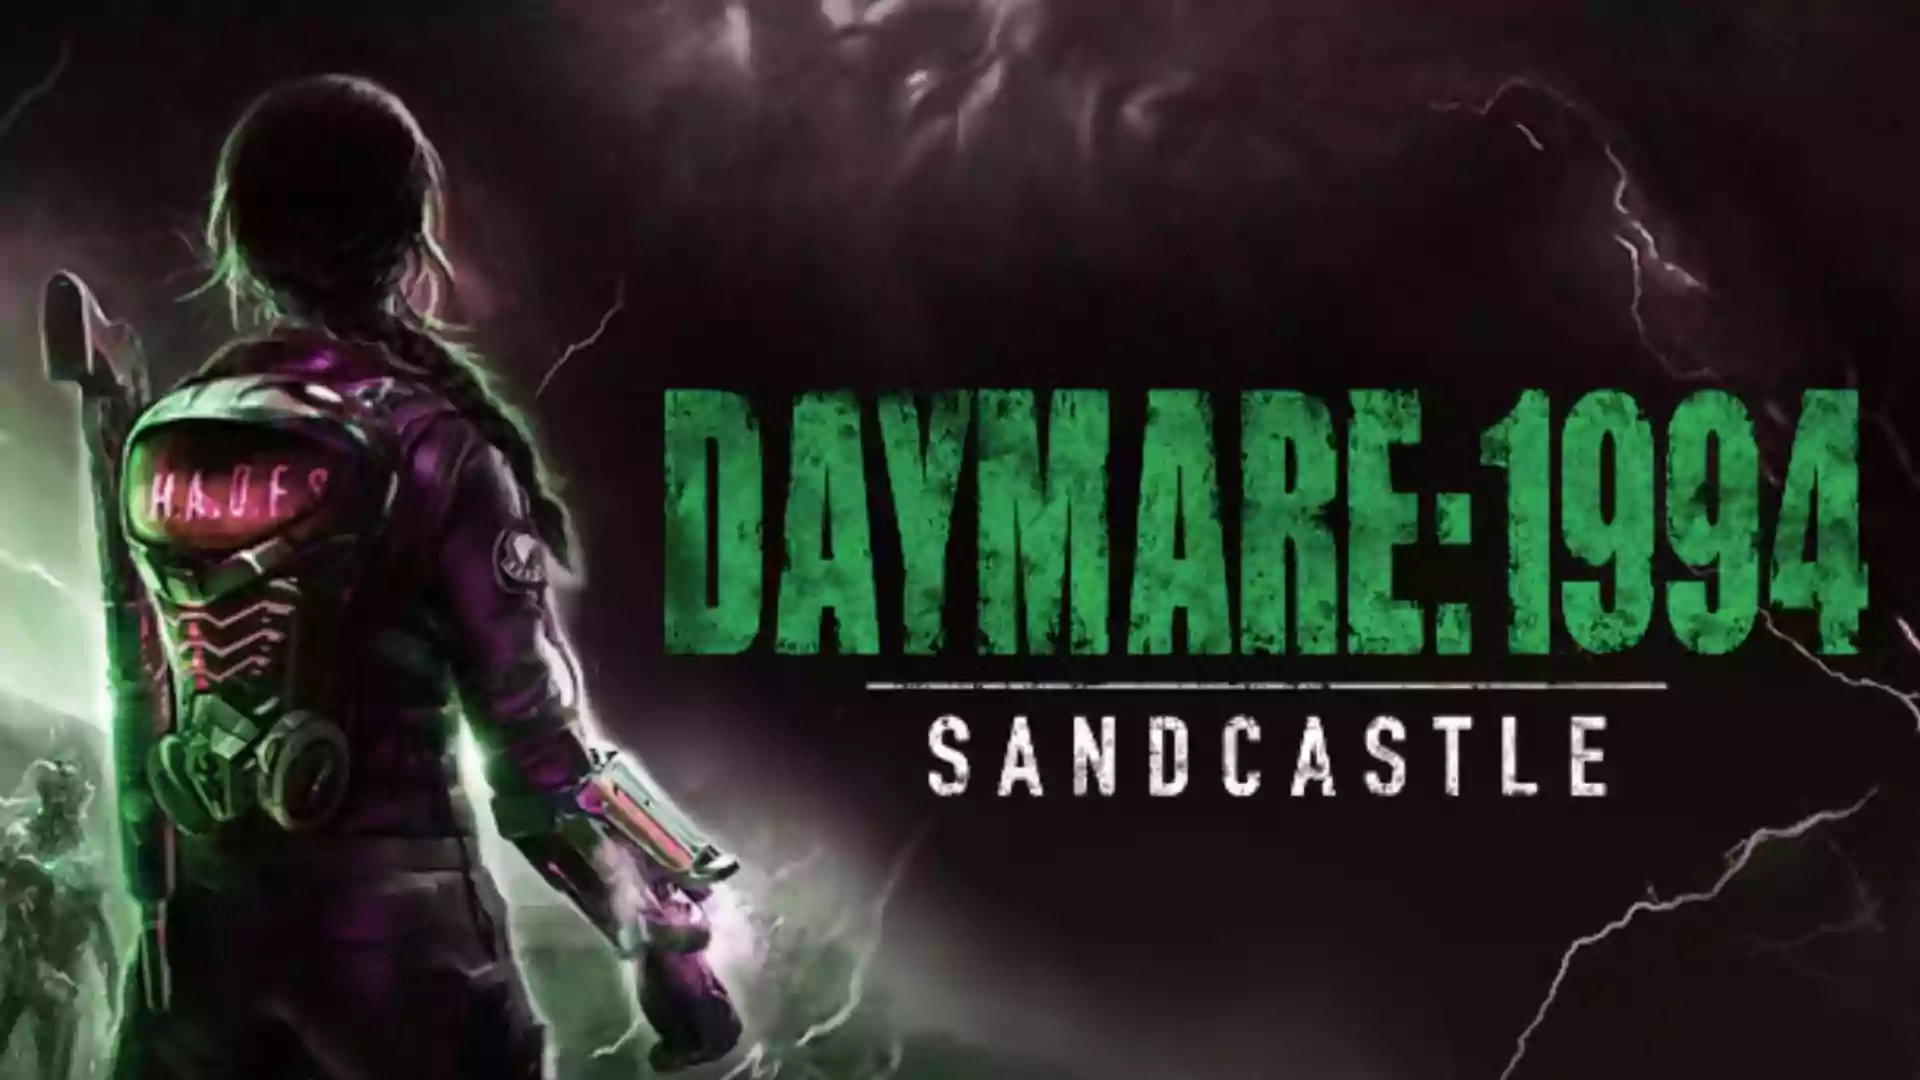 Daymare 1994: Sandcastle Parents Guide and age rating